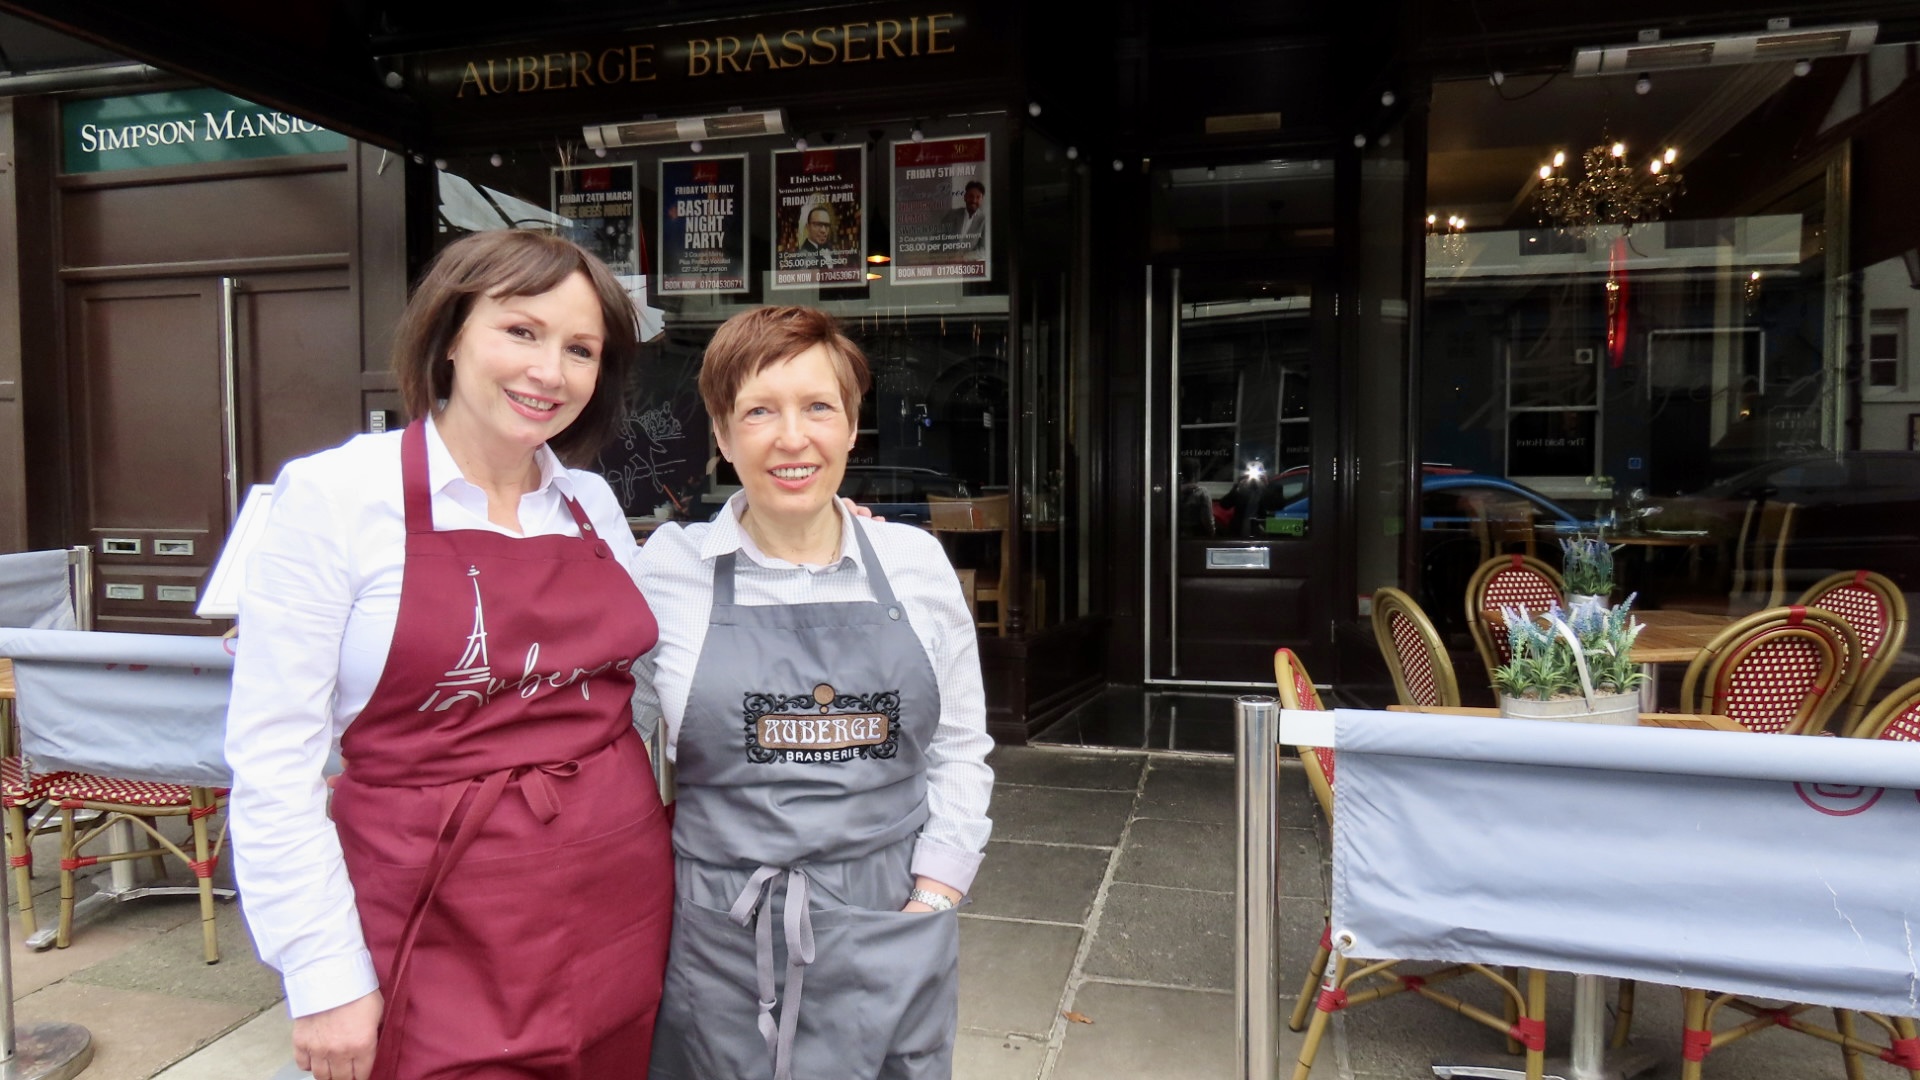 Owner Julie McMahon (left) and Manager Linda Burnside (right) at Auberge Brasserie in Southport. Photo by Andrew Brown Media